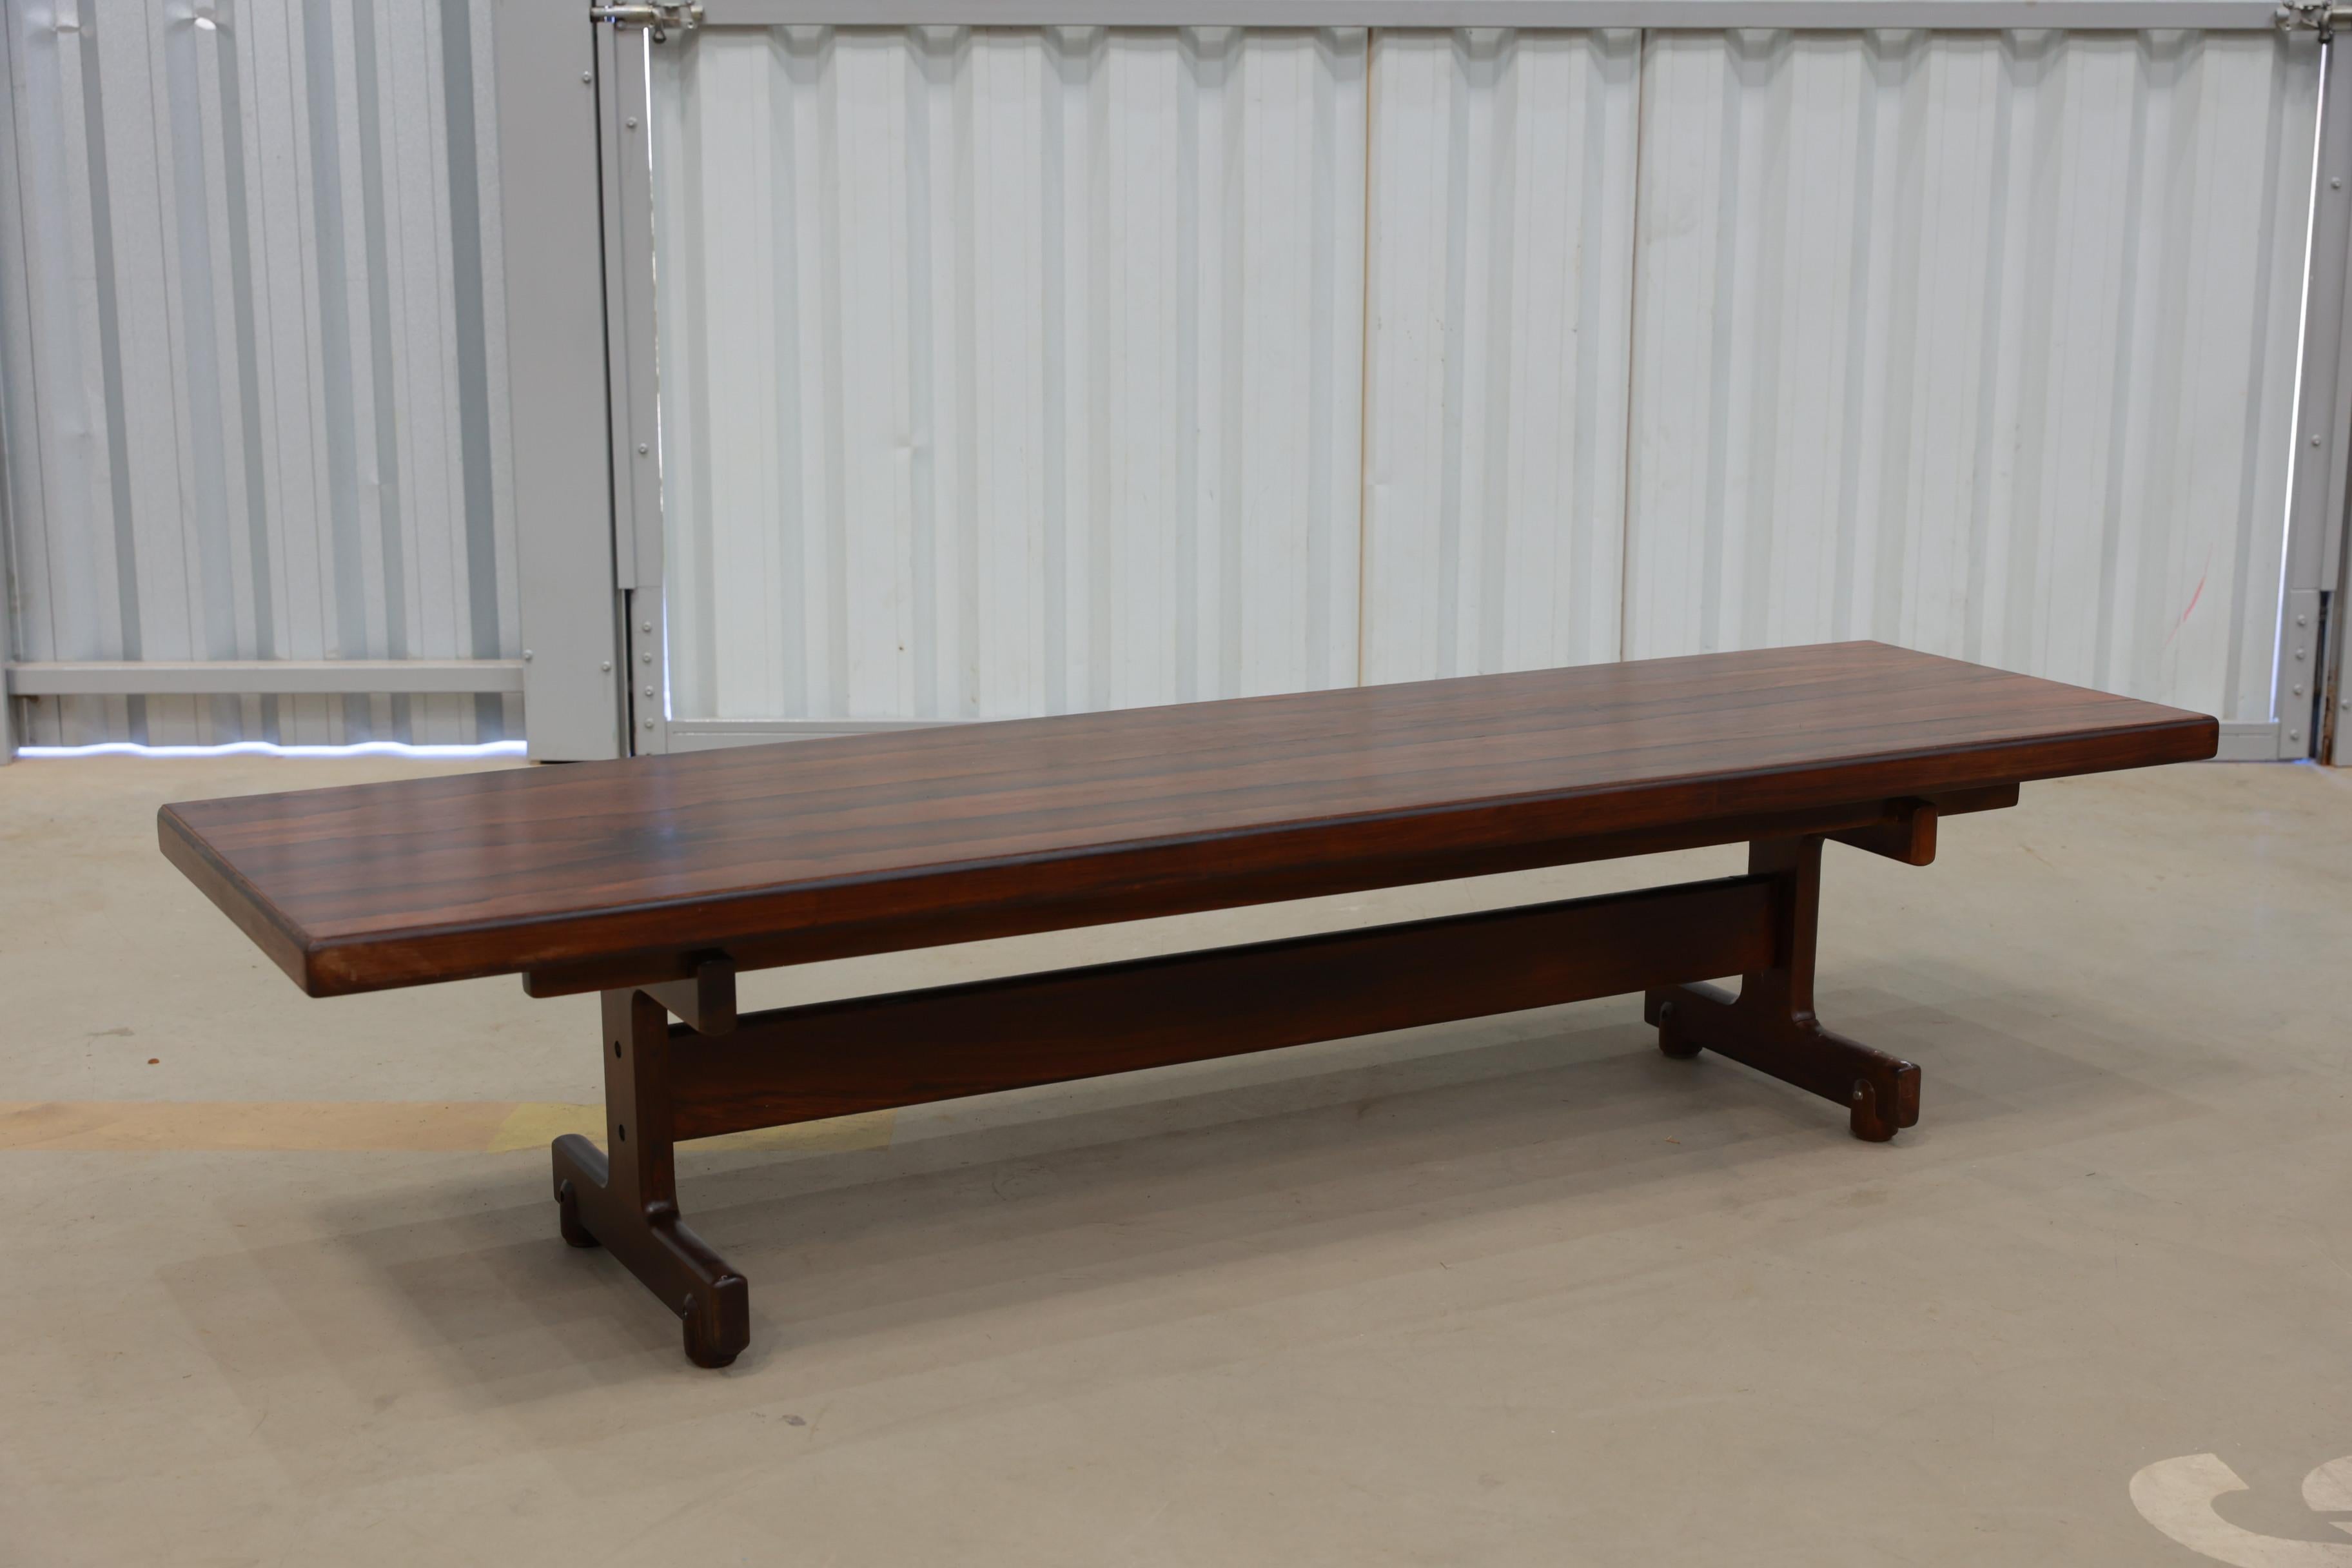 20th Century Mid-Century Modern Bench “Cíntia” by Sergio Rodrigues, Brazil, 1964 For Sale